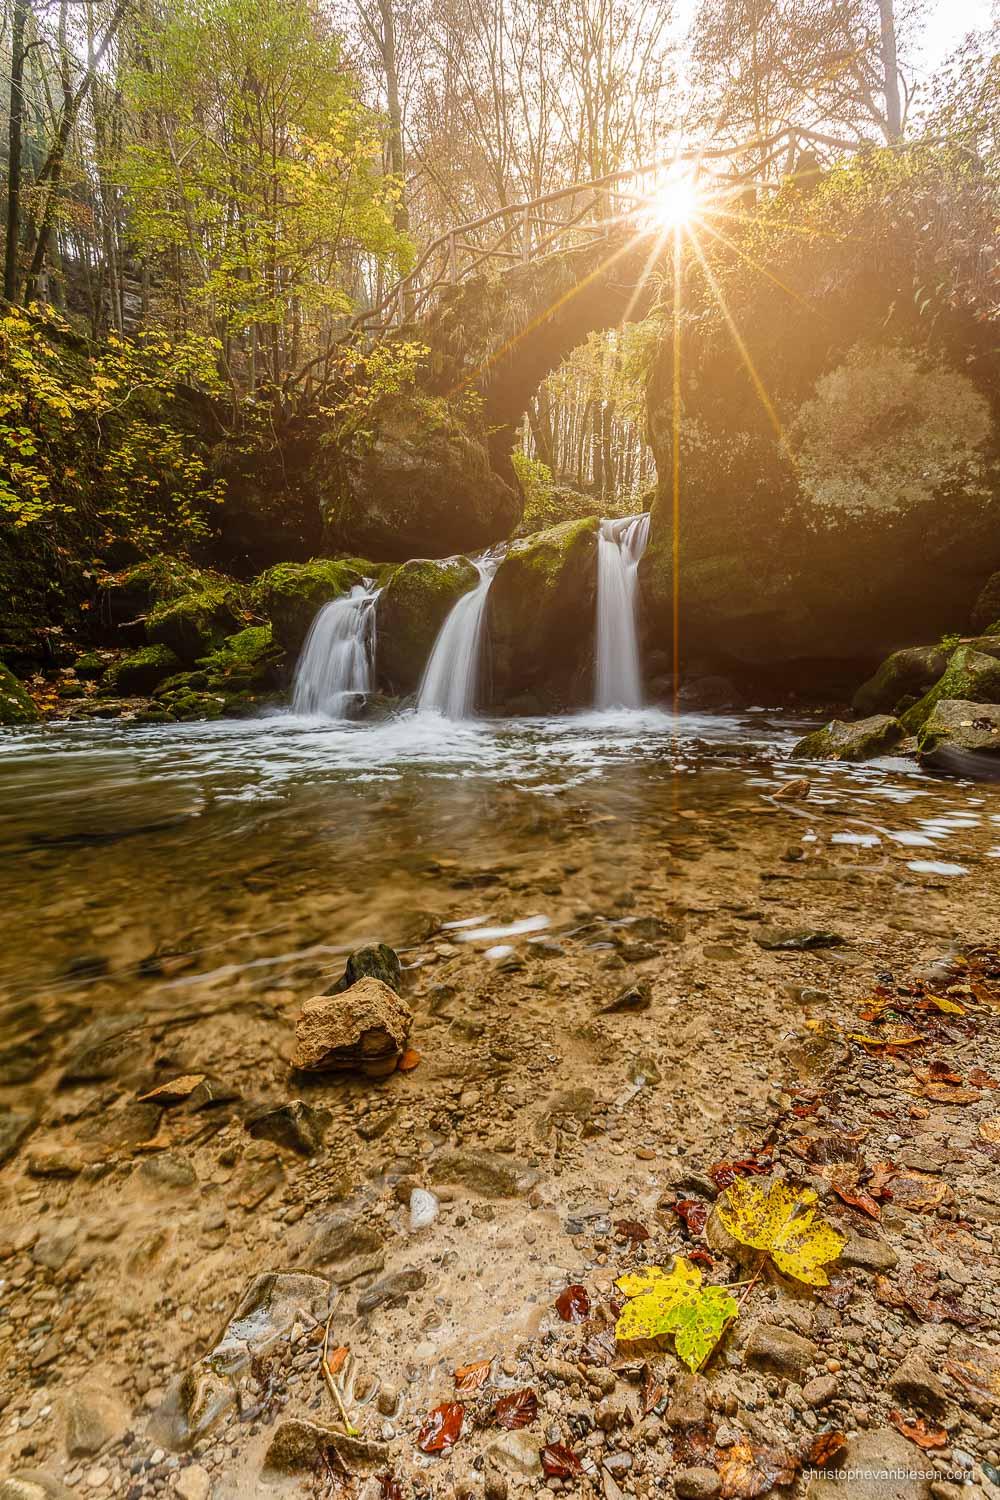 Visit the Mullerthal - Luxembourg - The Schiessentumpel on the Mullerthal trail in Luxembourg during Autumn - Schiessentumpel in Autumn